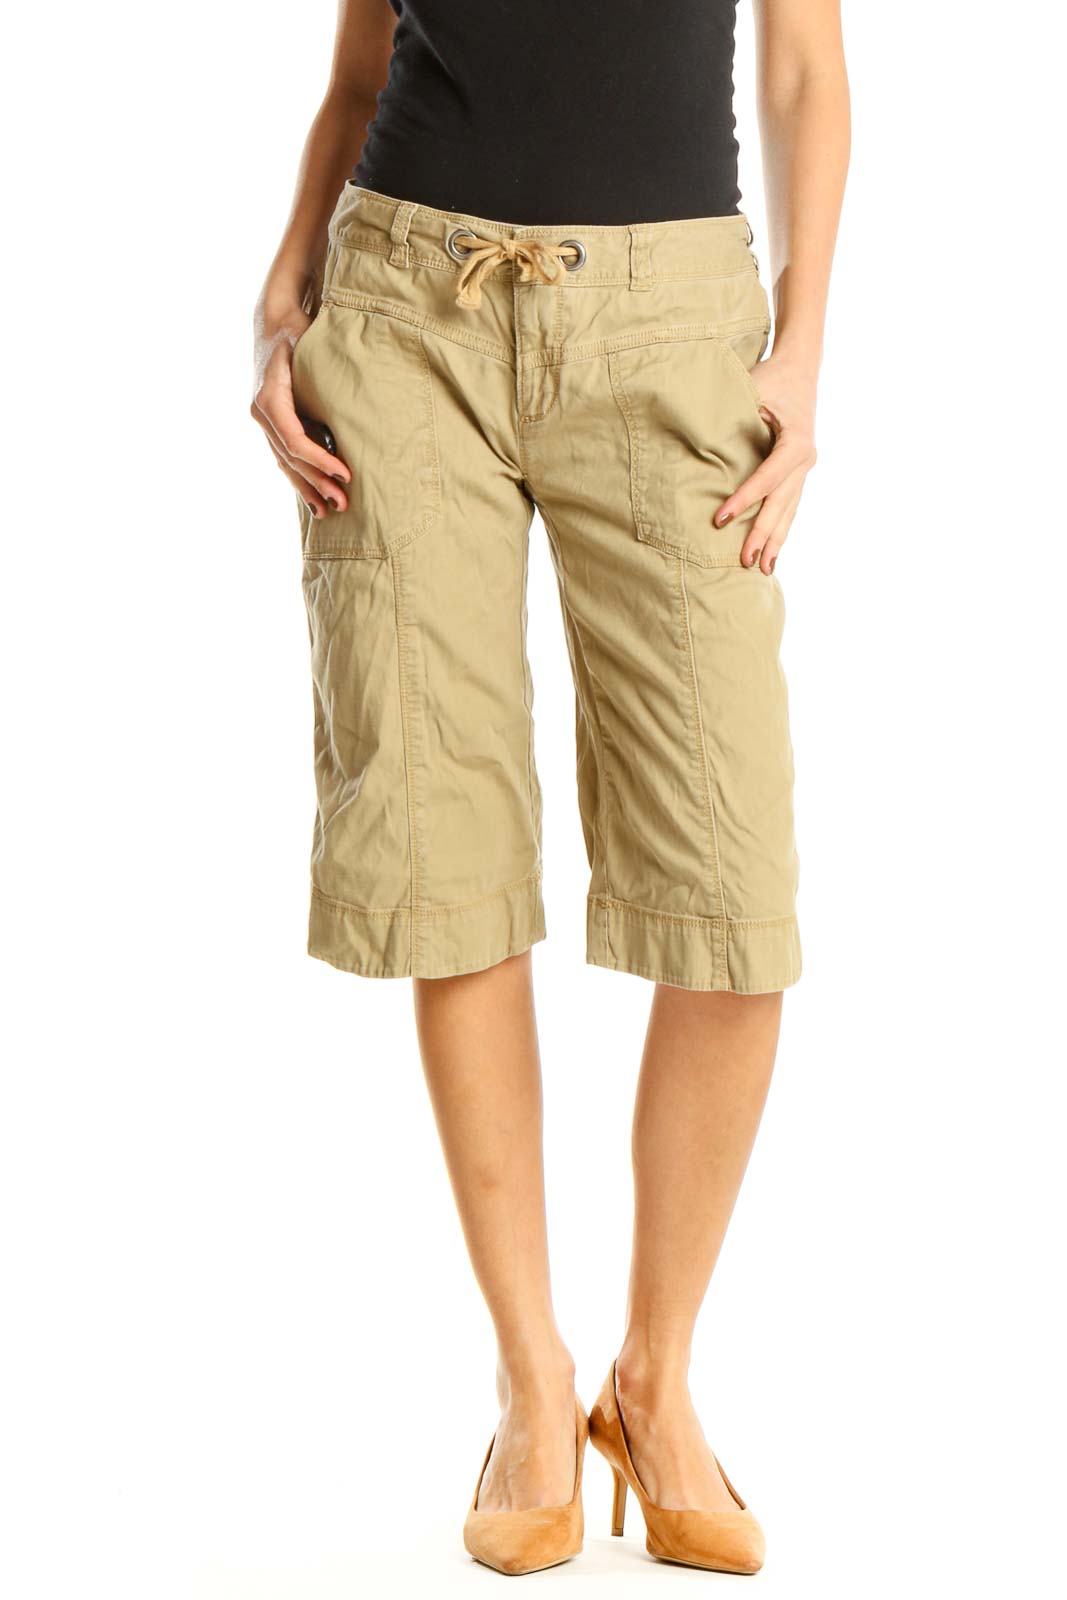 Beige All Day Wear Cargos Shorts Front